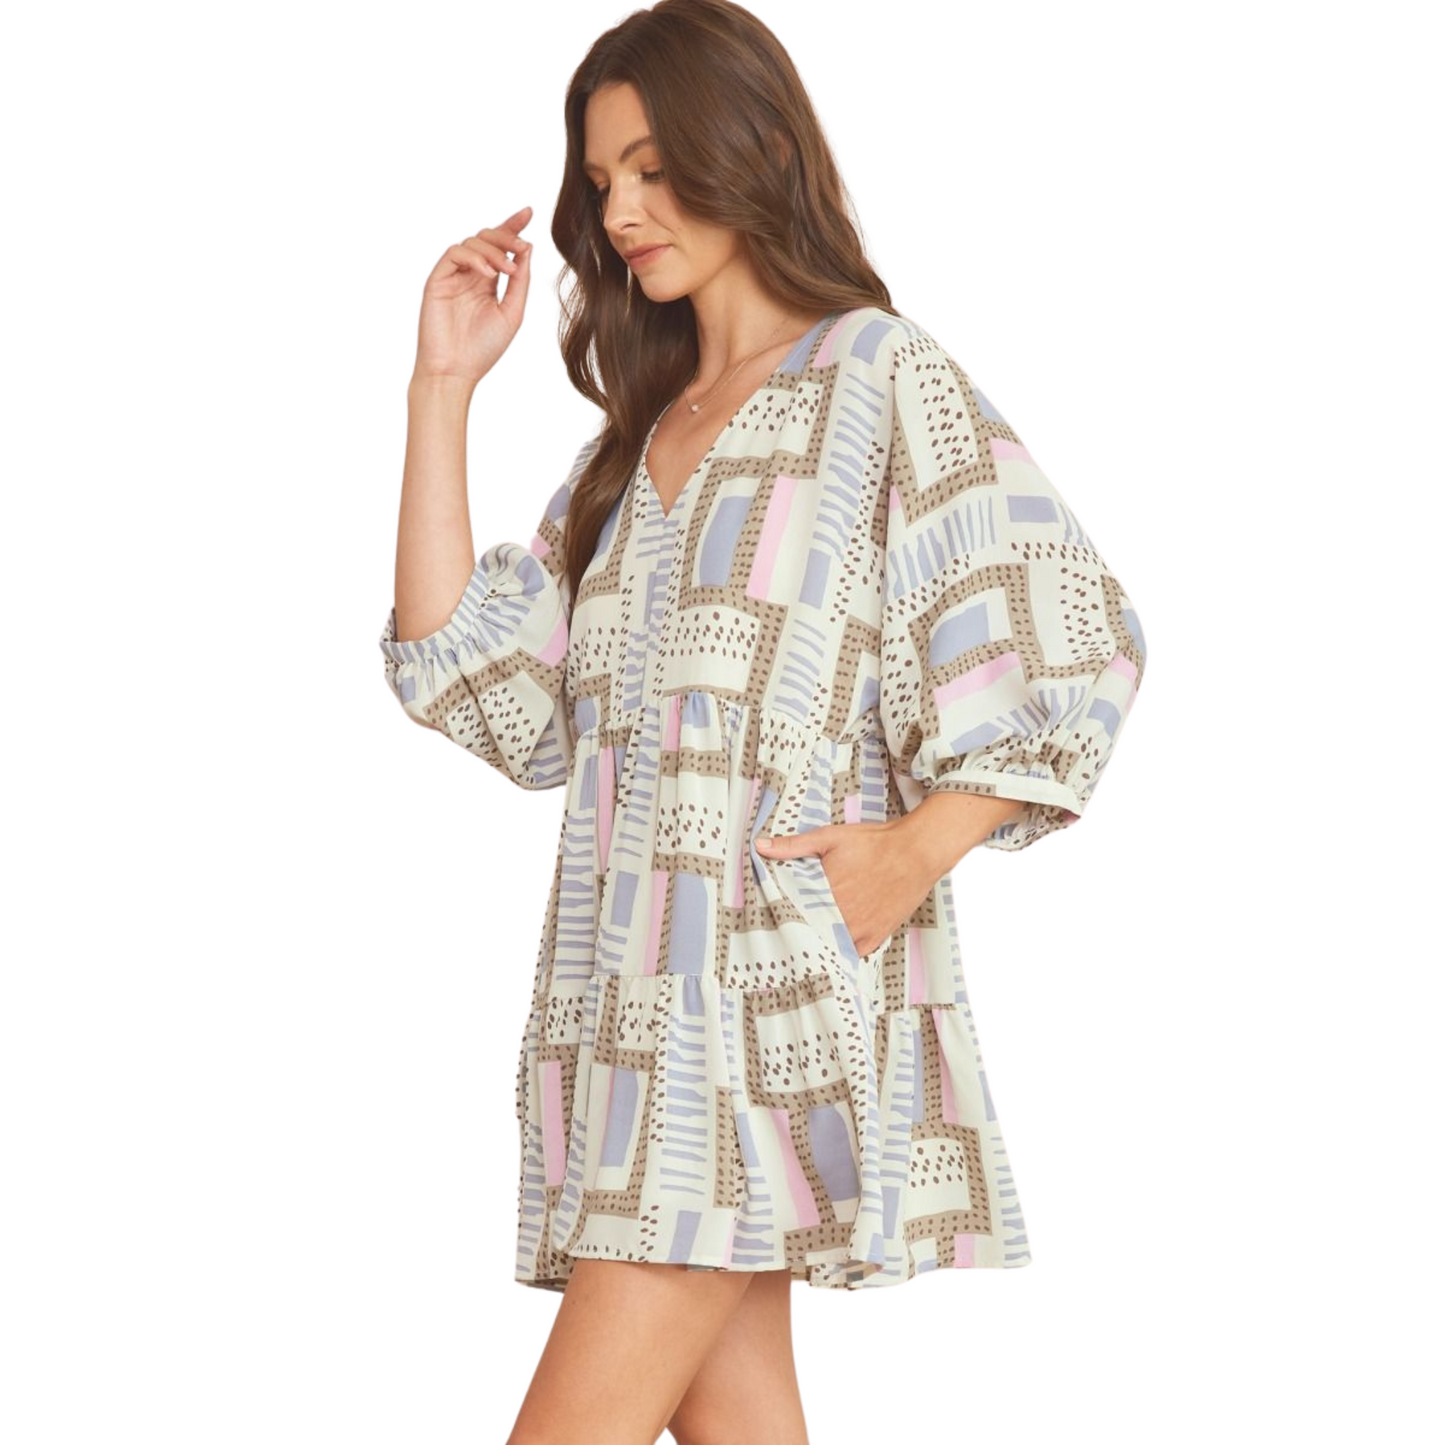 This printed v-neck mini dress is a versatile addition to your wardrobe. The 3/4 sleeves and button closure at the back make it easy to style for any occasion. With pockets at the side, you can keep your essentials close by. The semi-sheer fabric is lightweight and lined for comfort. Available in a beautiful slate blue color.